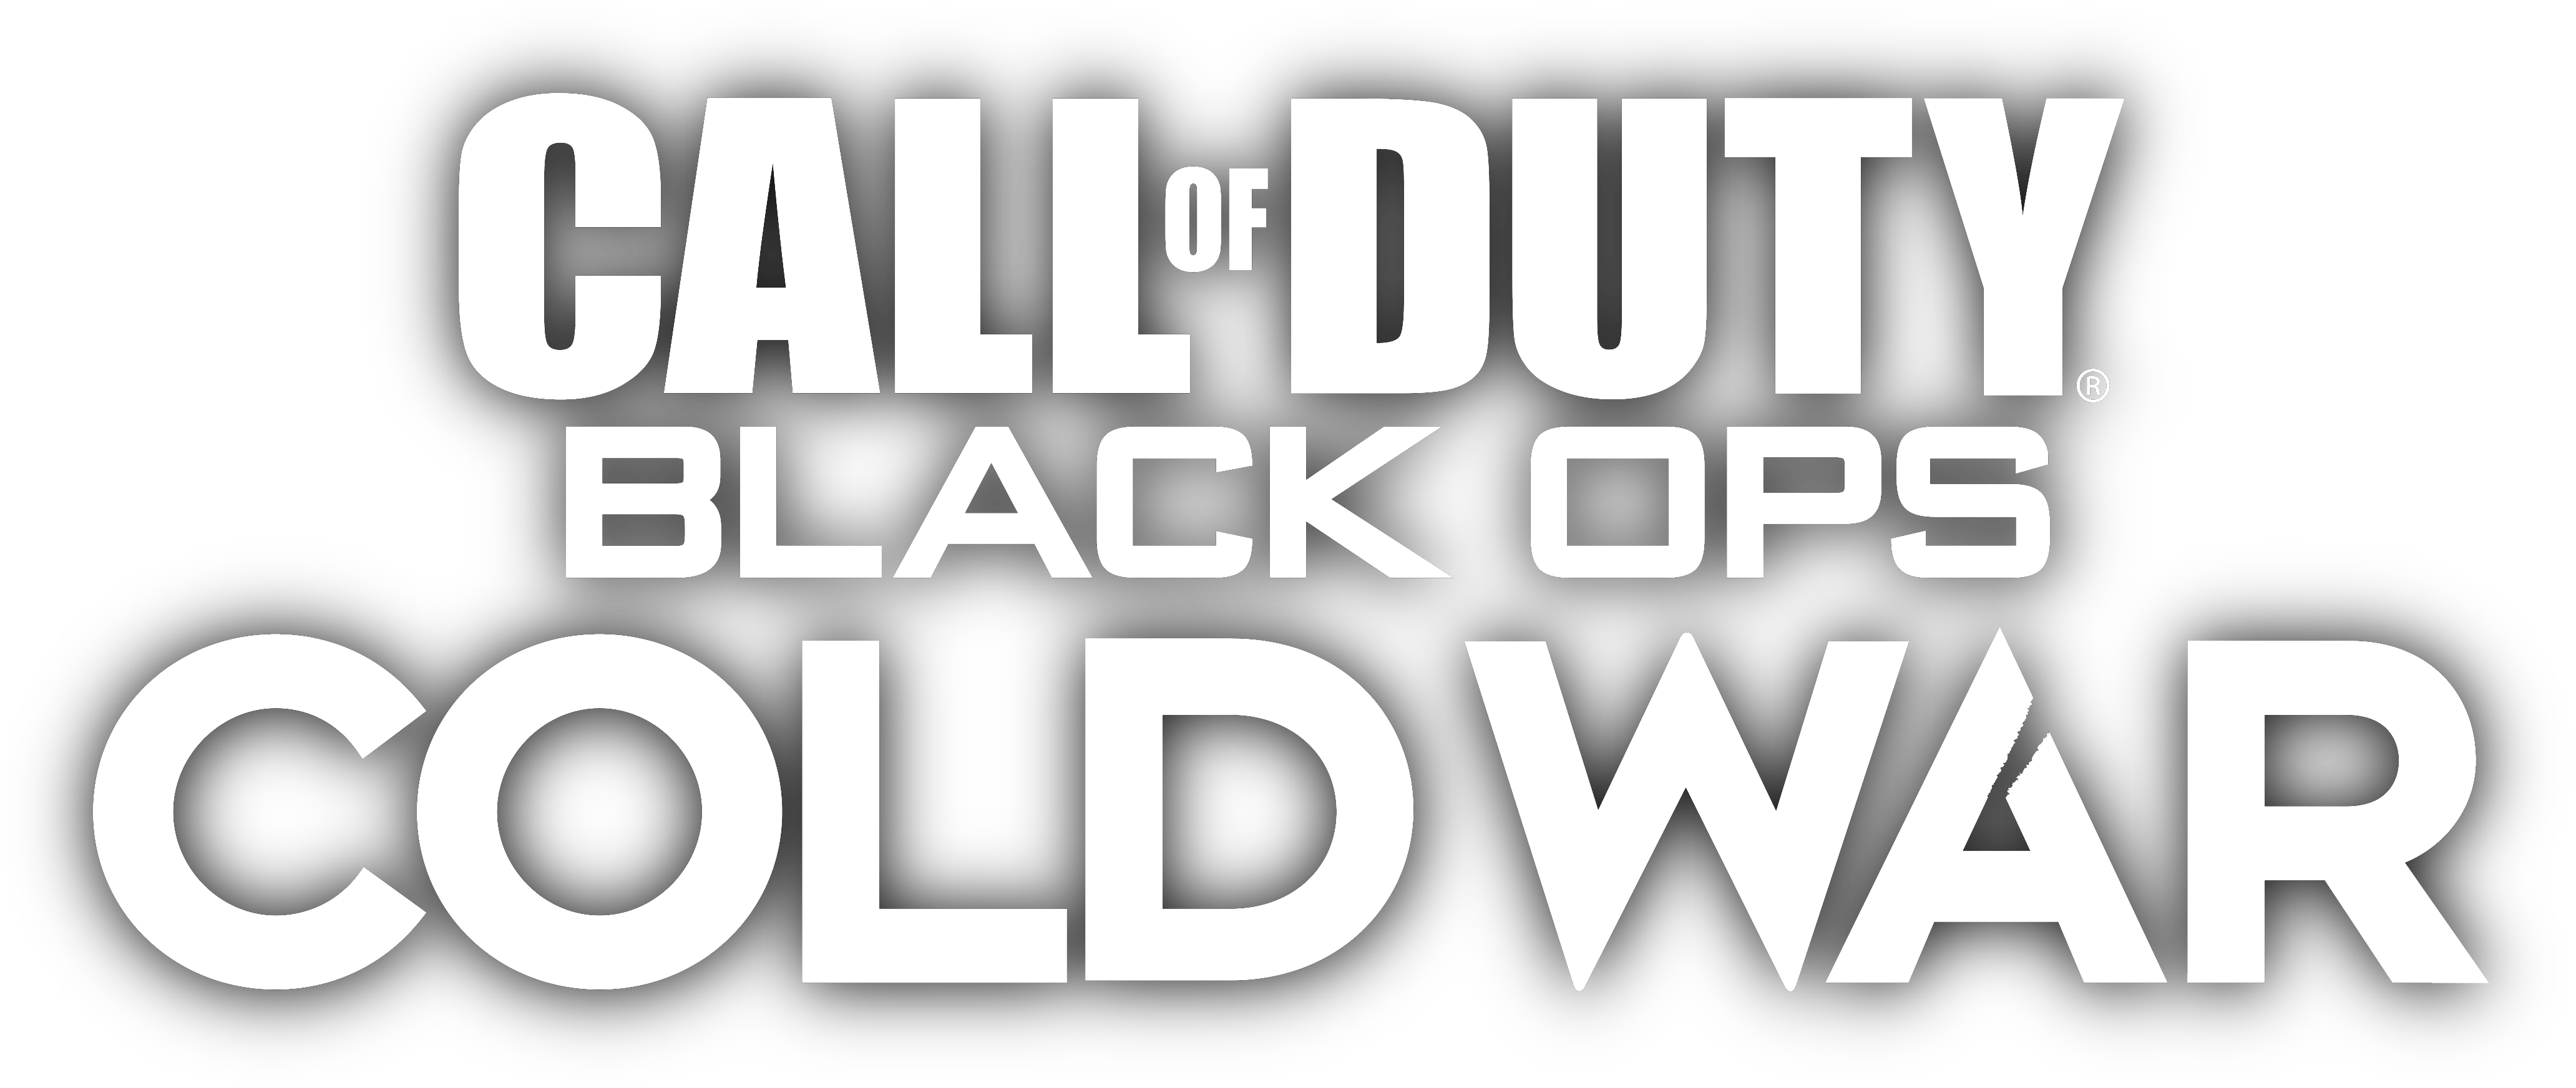 call of duty world war 2 1280 720 png images